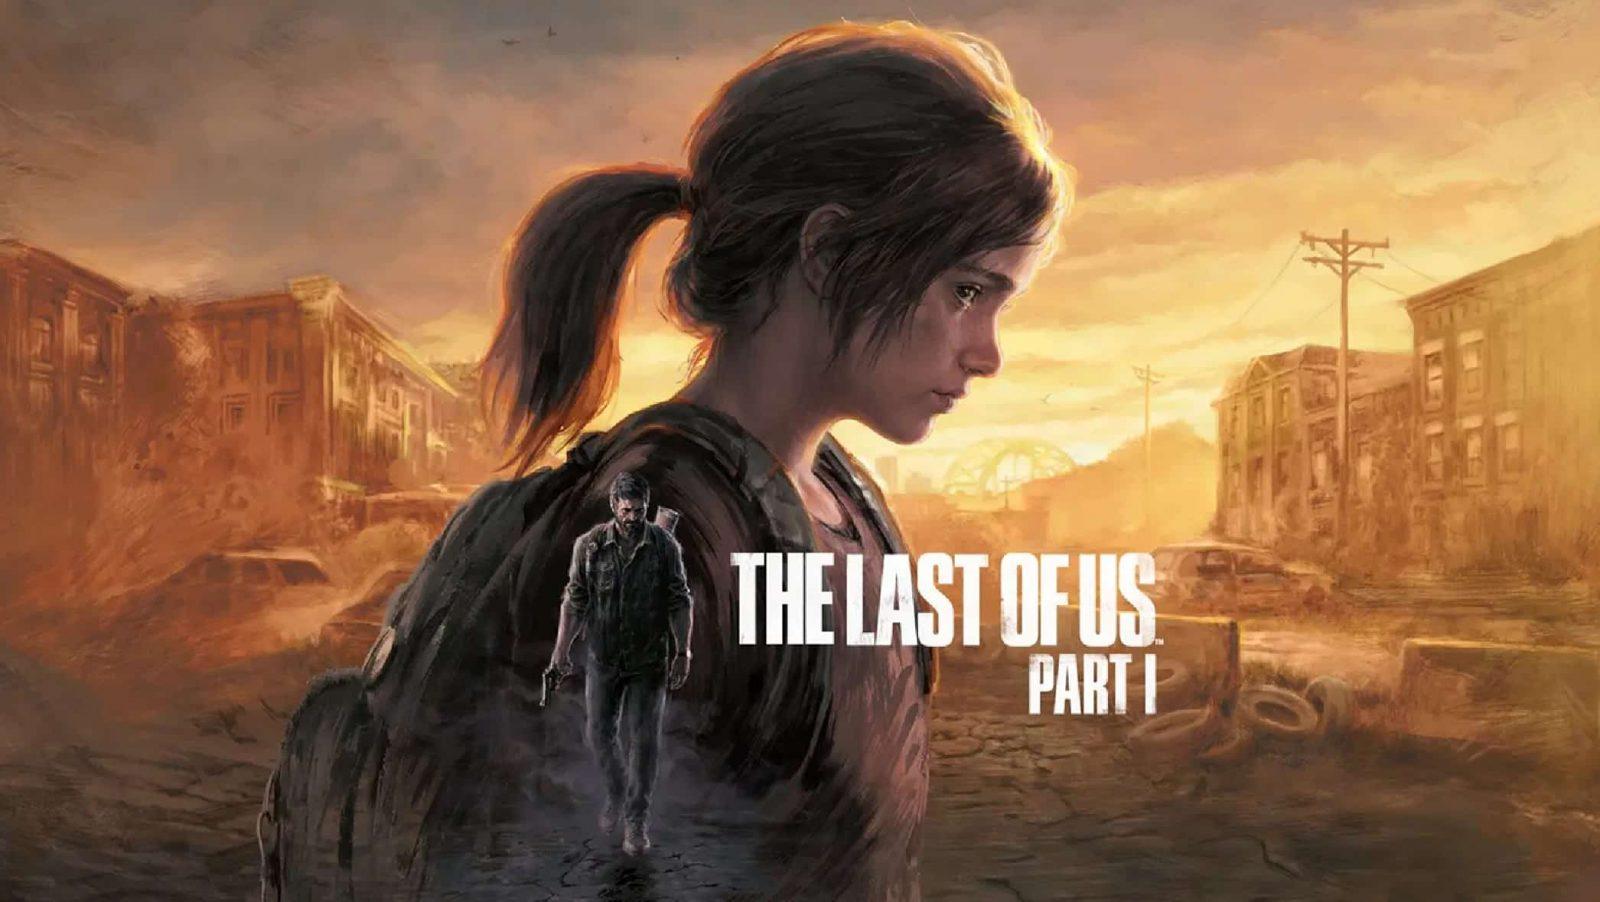 The Last of Us Remake Release Date Potentially Revealed in New Rumor